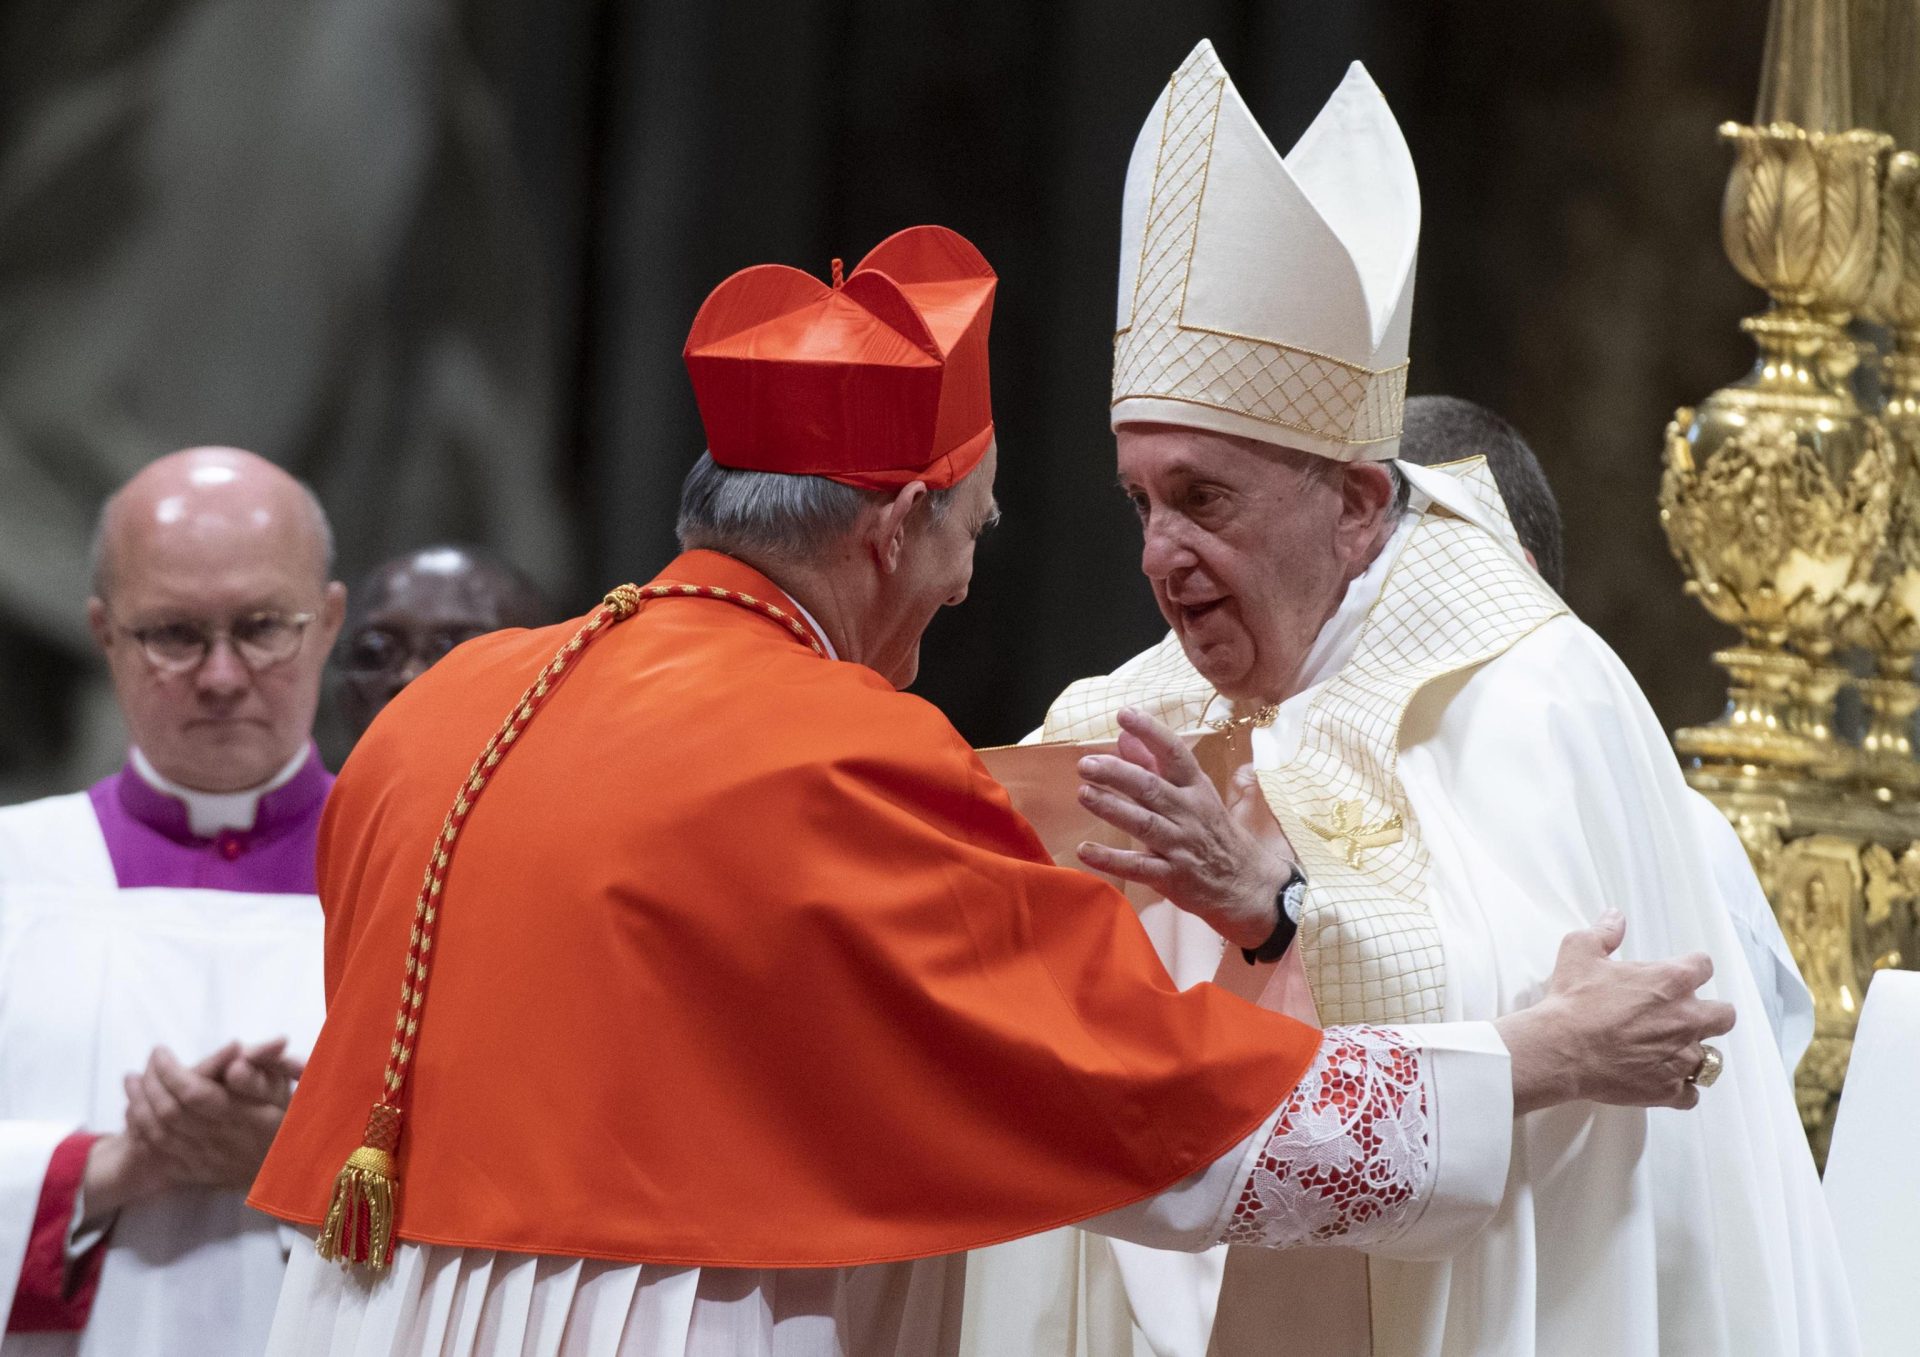 Pope Francis with Mateo Zuppi, in a file image.